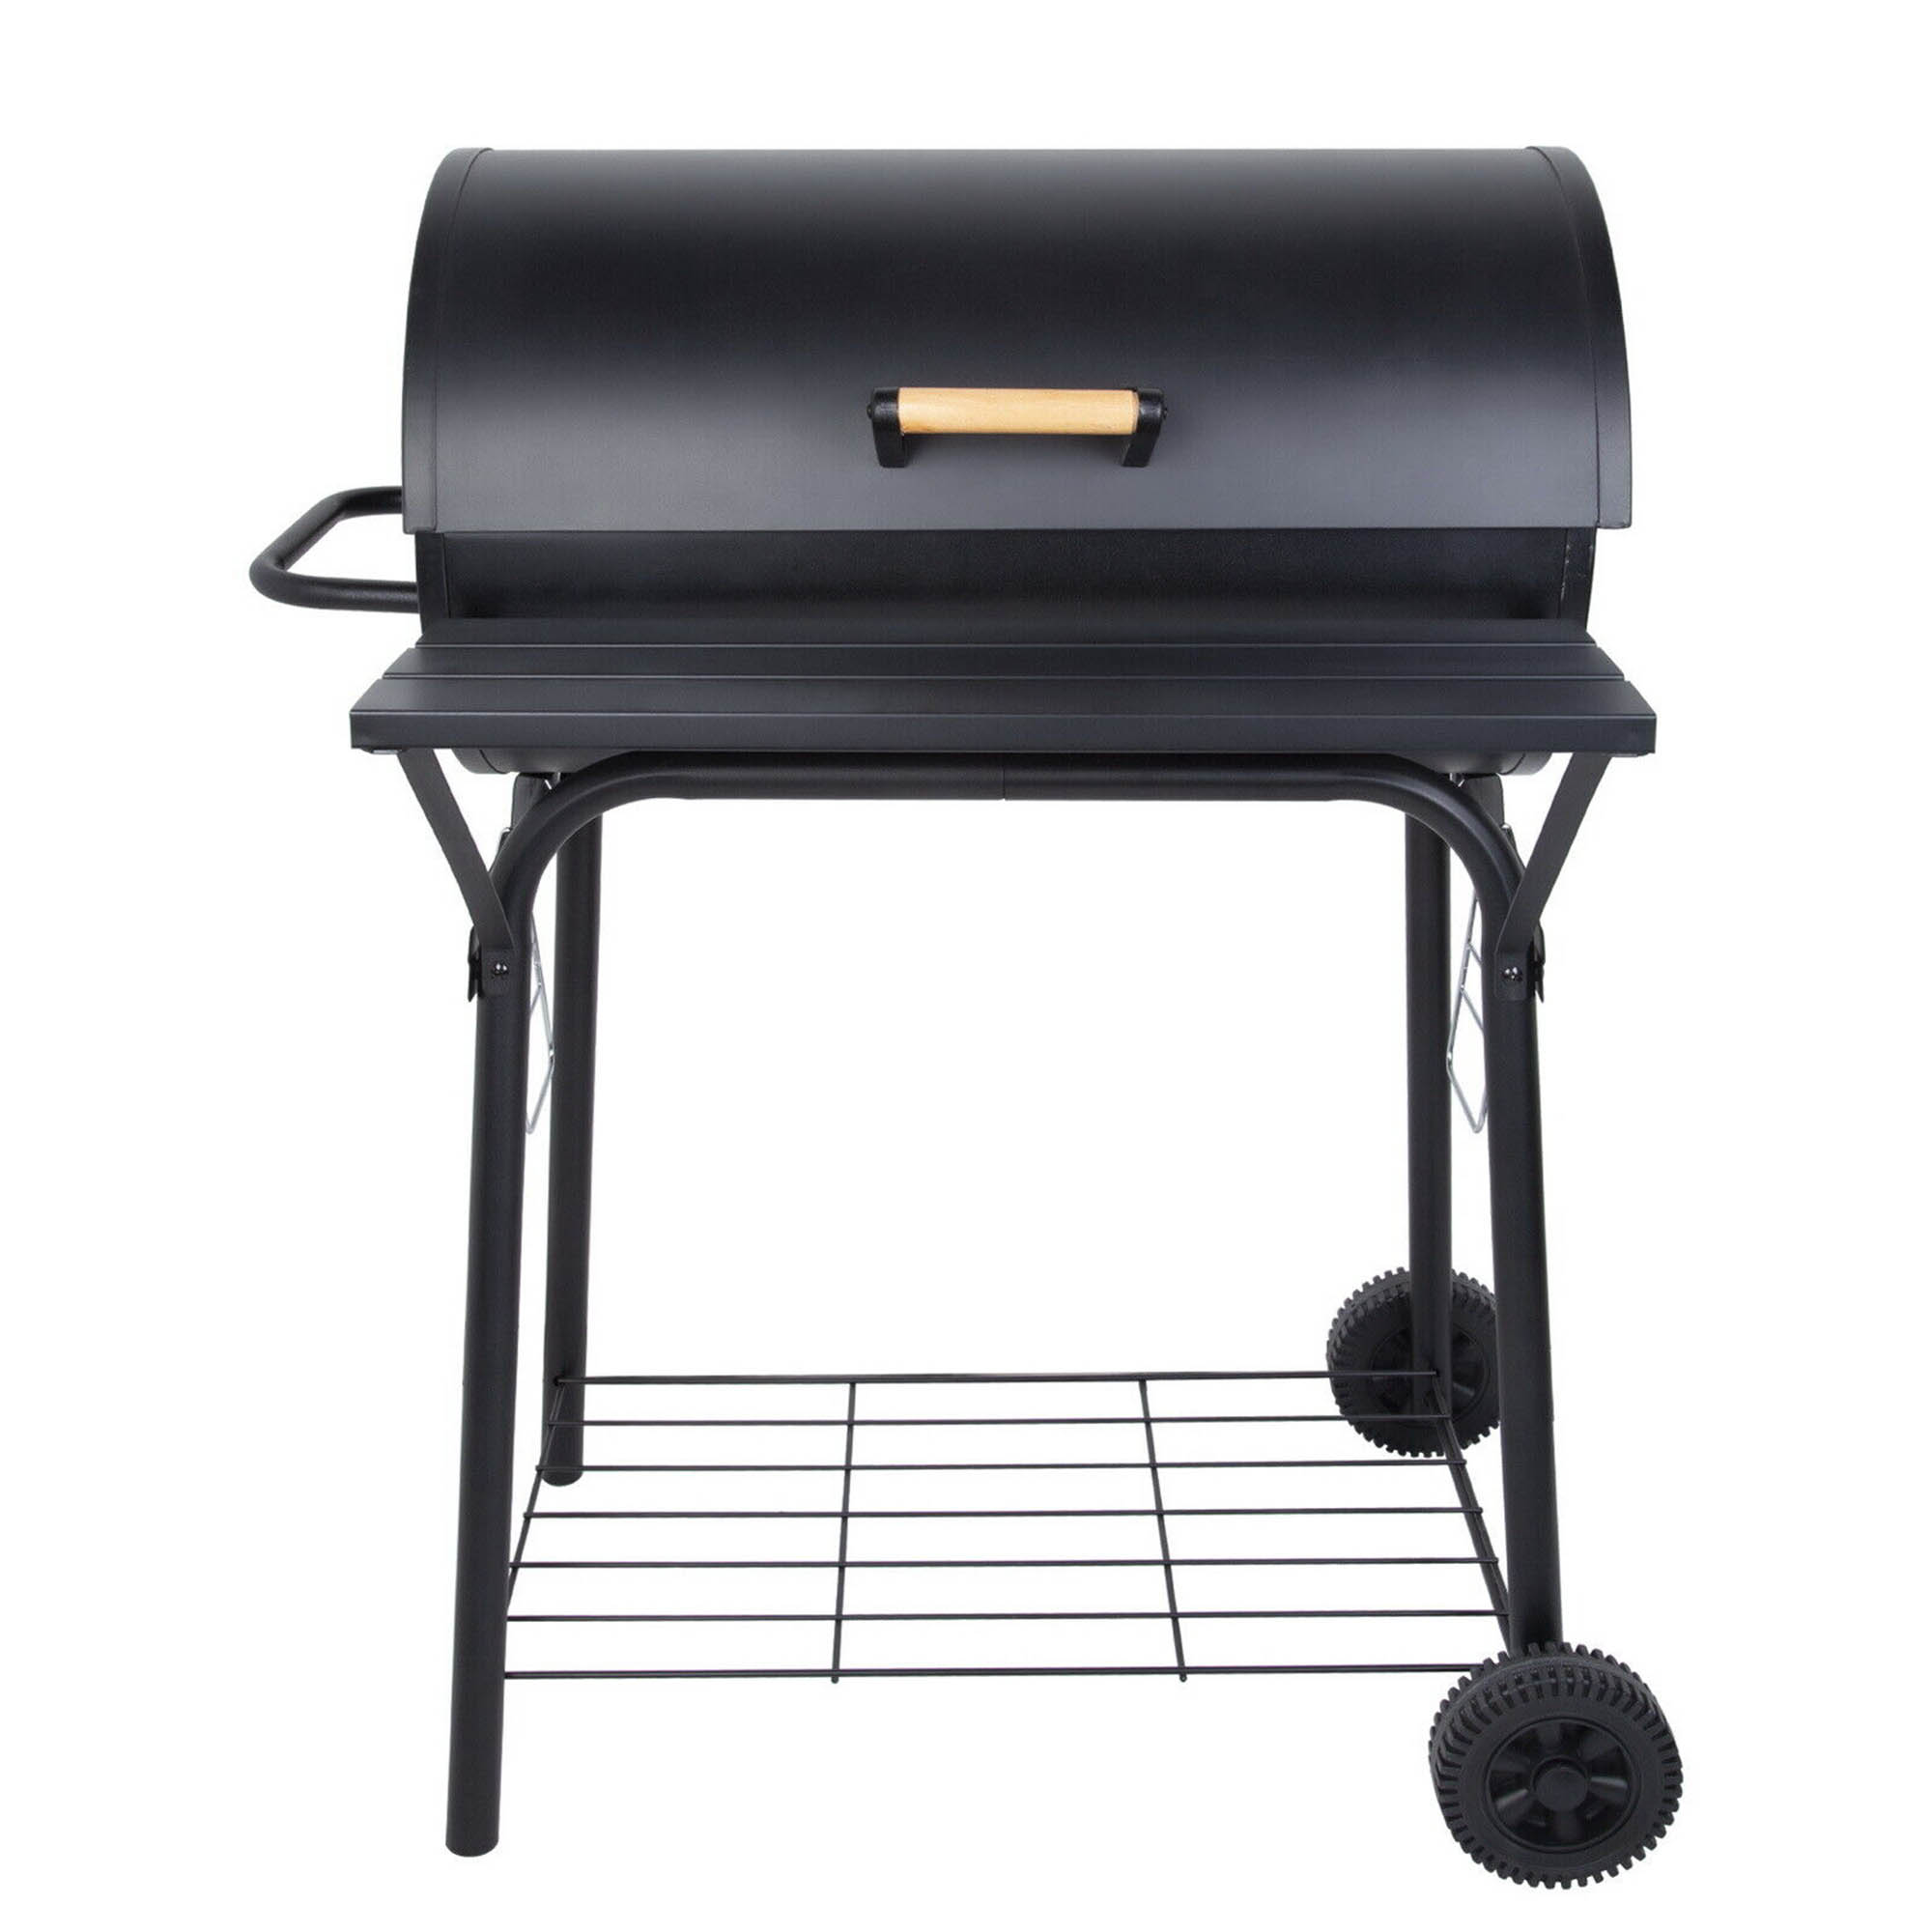 SHCKE Portable Charcole Grill Folding Charcoal Camping Barbecue Oven Heavy Duty Charcoal Barrel BBQ Grill, Outdoor Cooking for Outdoor Backyard, Patio and Parties - image 1 of 8